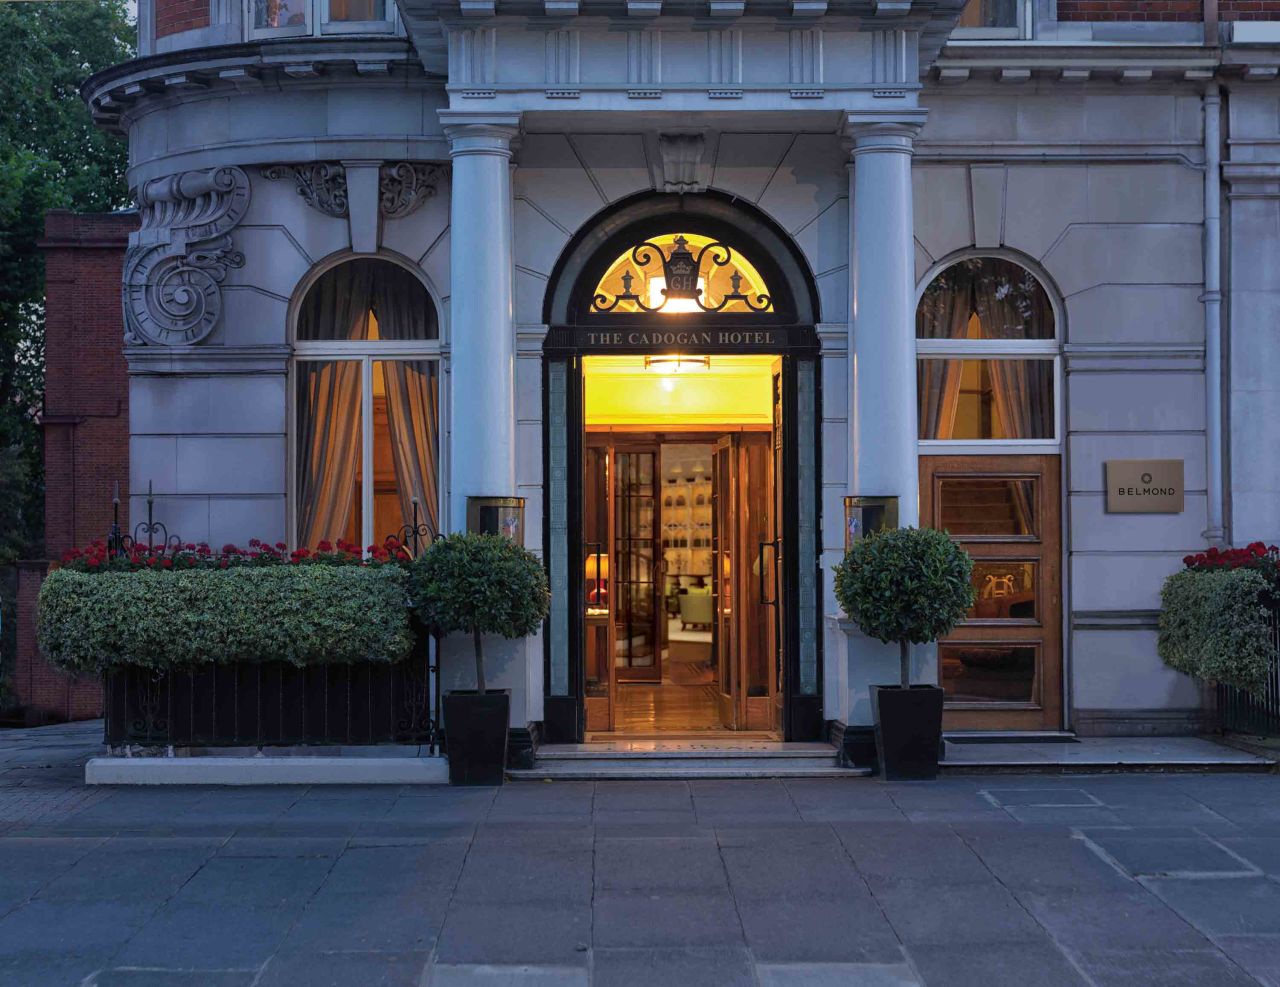 The hotel is located in London's Chelsea neighborhood, on the corner of Sloane and Pont Streets.